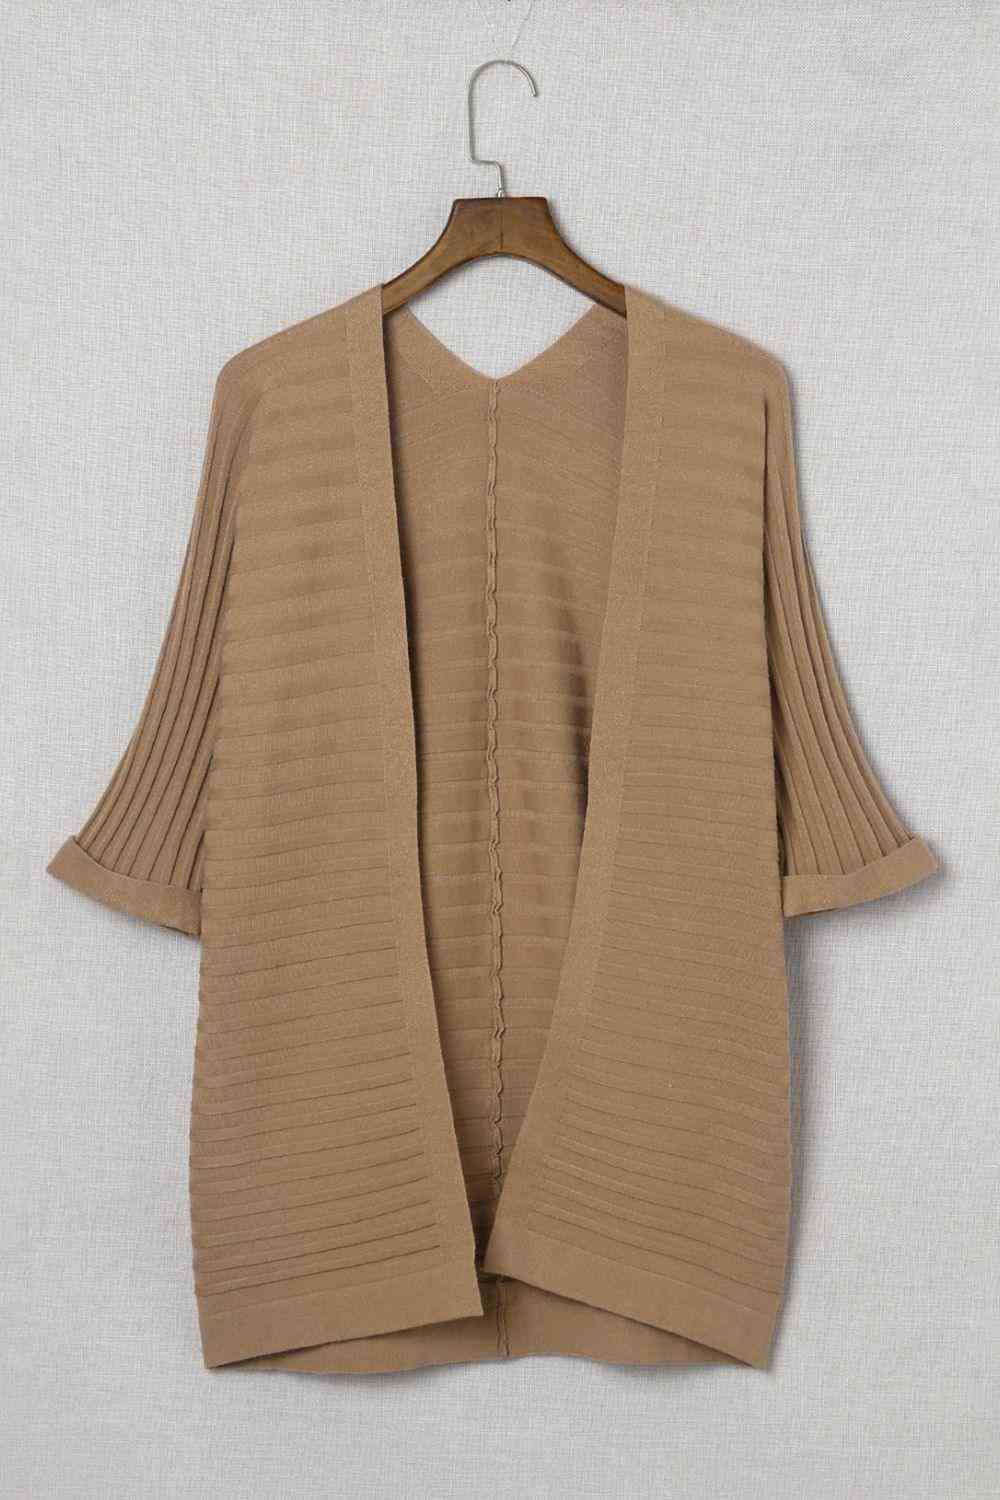 Ribbed Open Front Knit Cardigan - The Swanky Bee